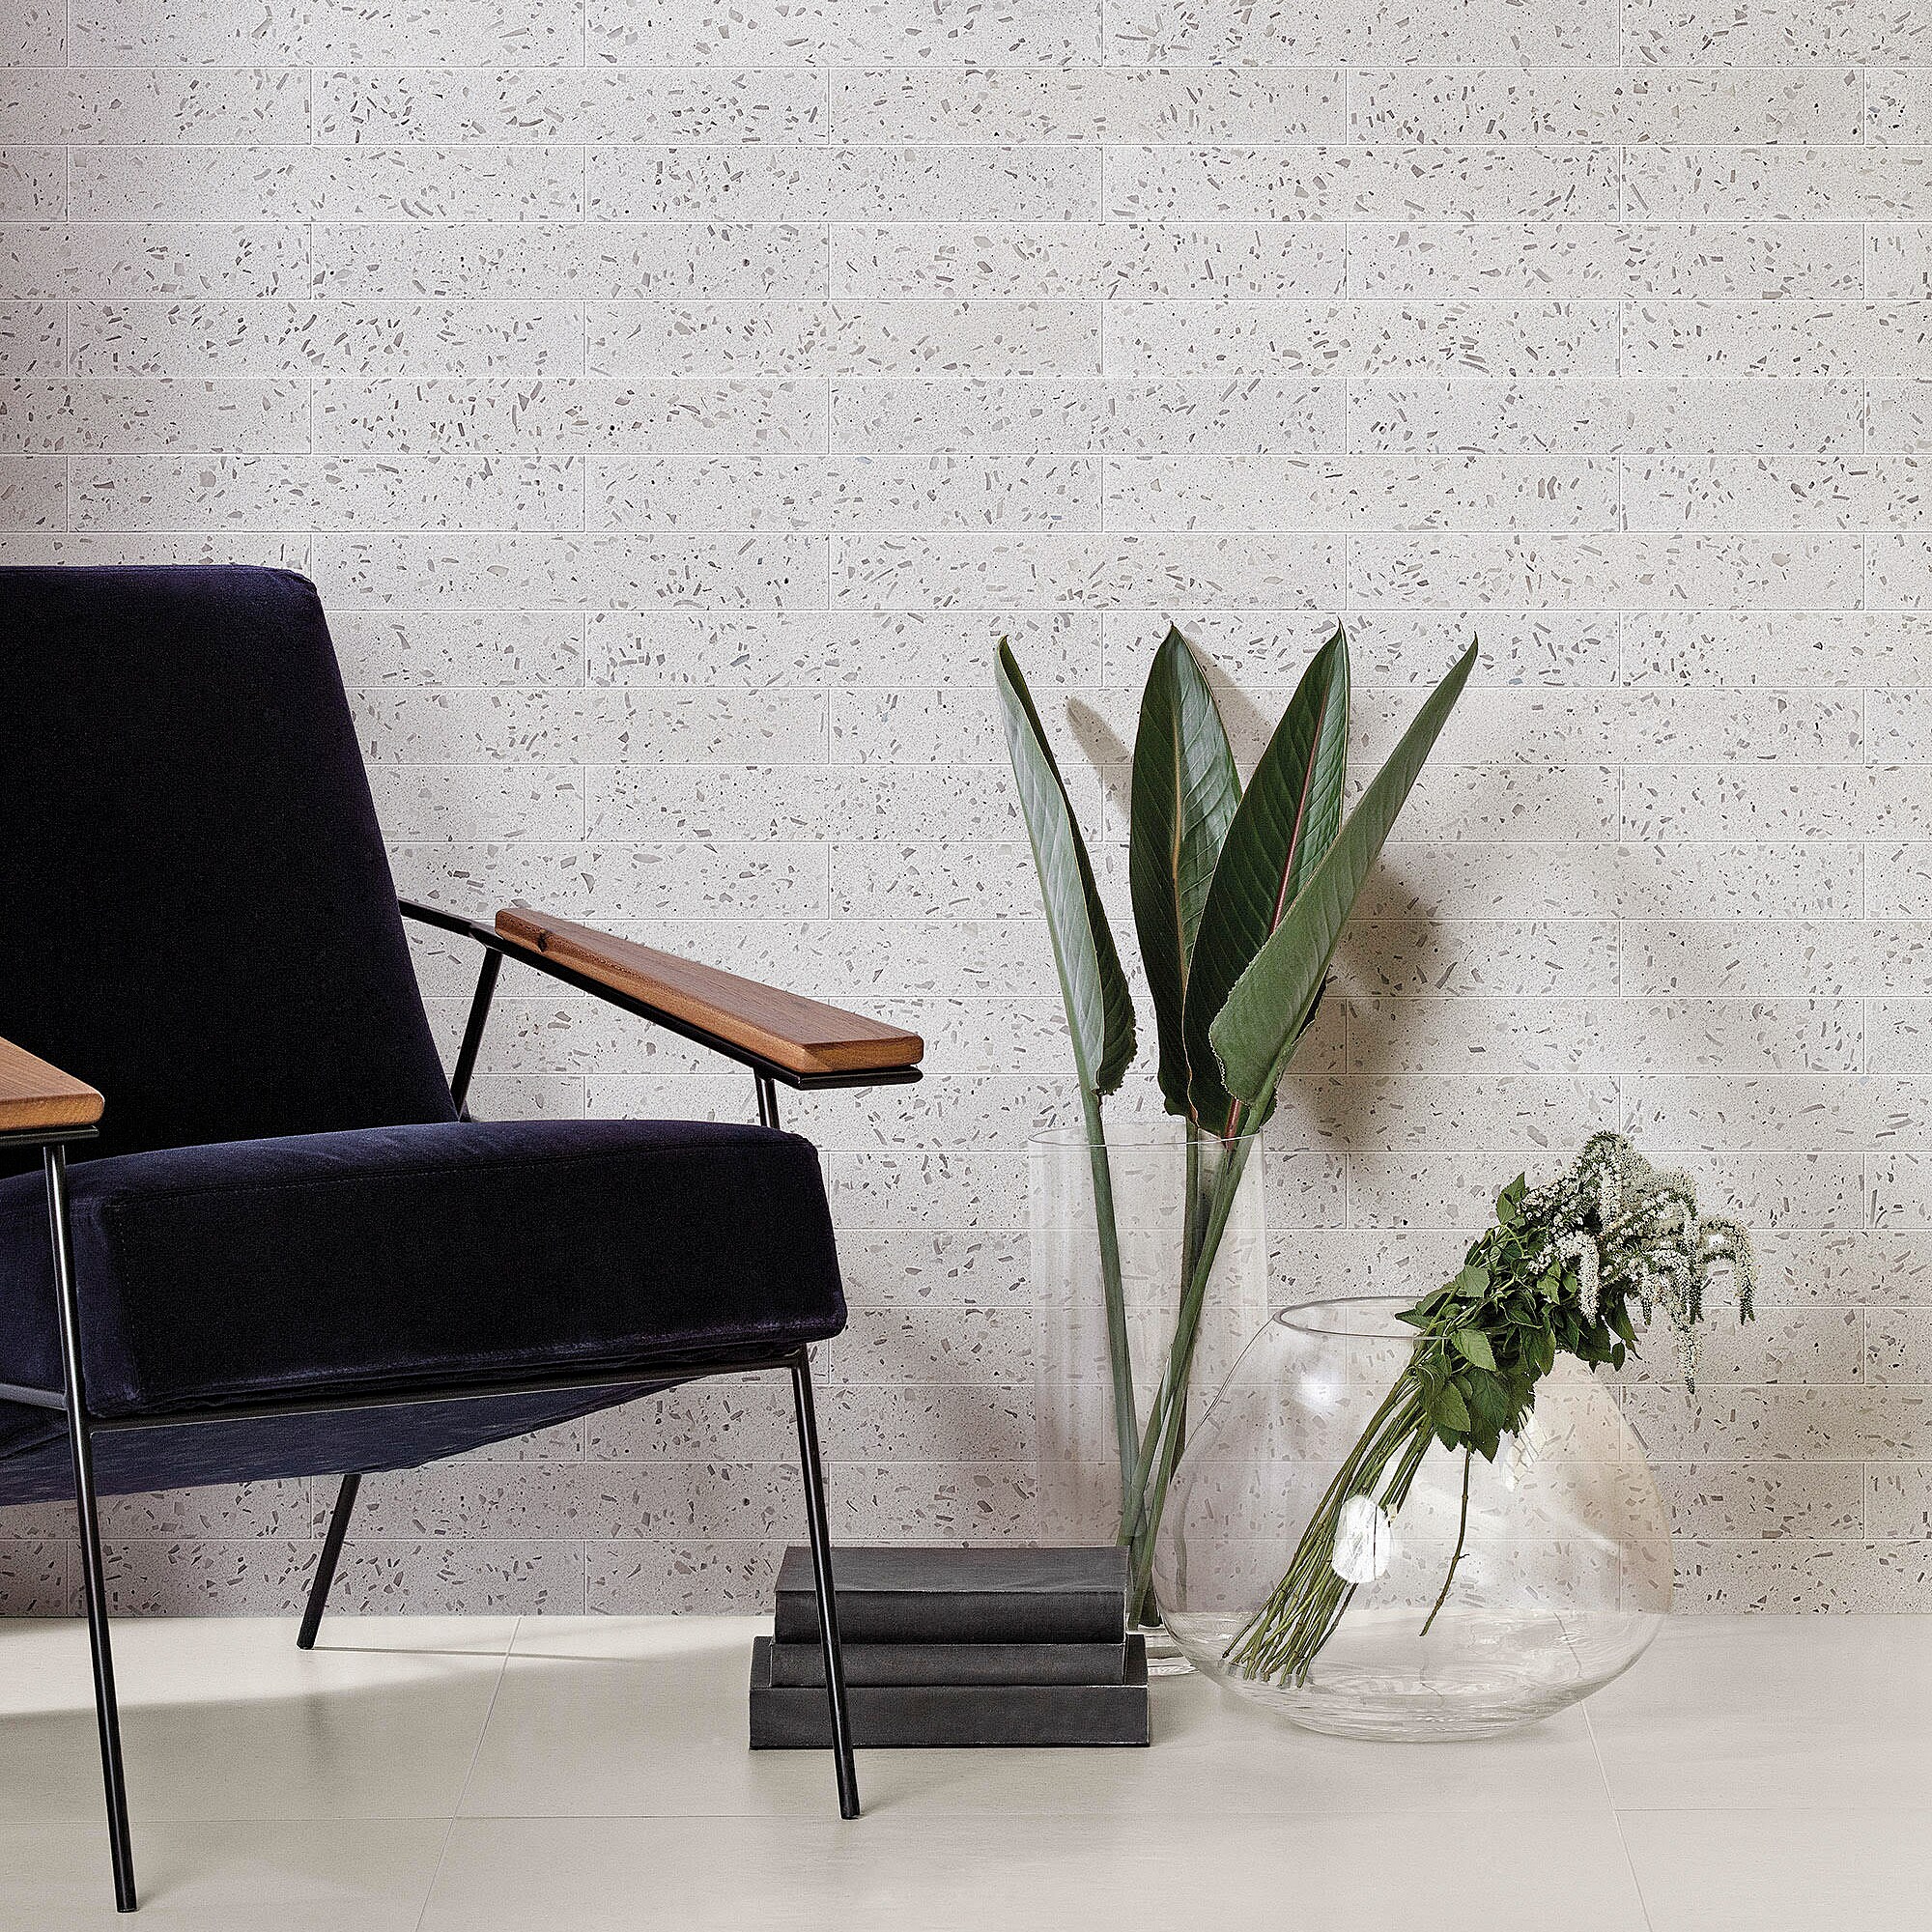 Artmore in department Wall at x Look Carton) Stone Stone (5.38-sq. 3-in Natural Brick Lunar Tile Gray Terrazzo Slate Matte Tile the 16-in ft/ Tile